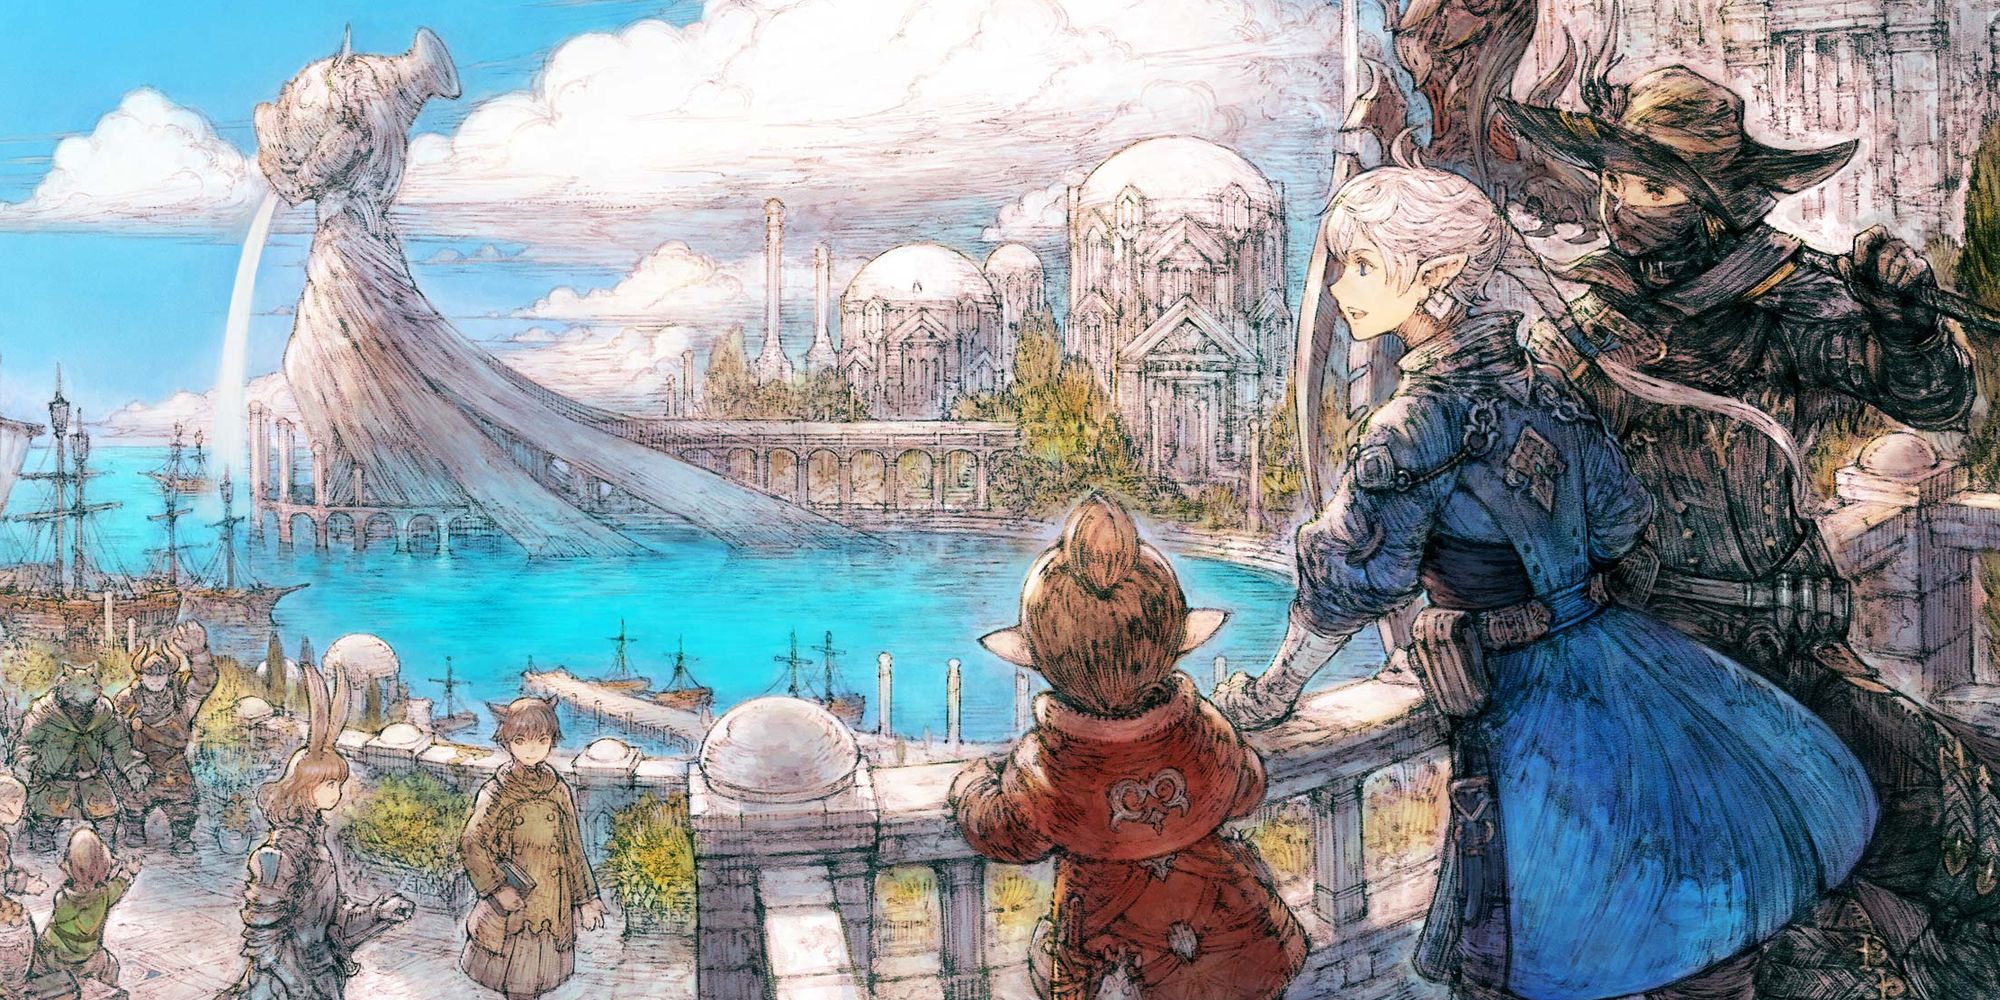 Final Fantasy 14 key artwork for Endwalker showing Alphinaud a lalafell and a reaper in Sharlayan